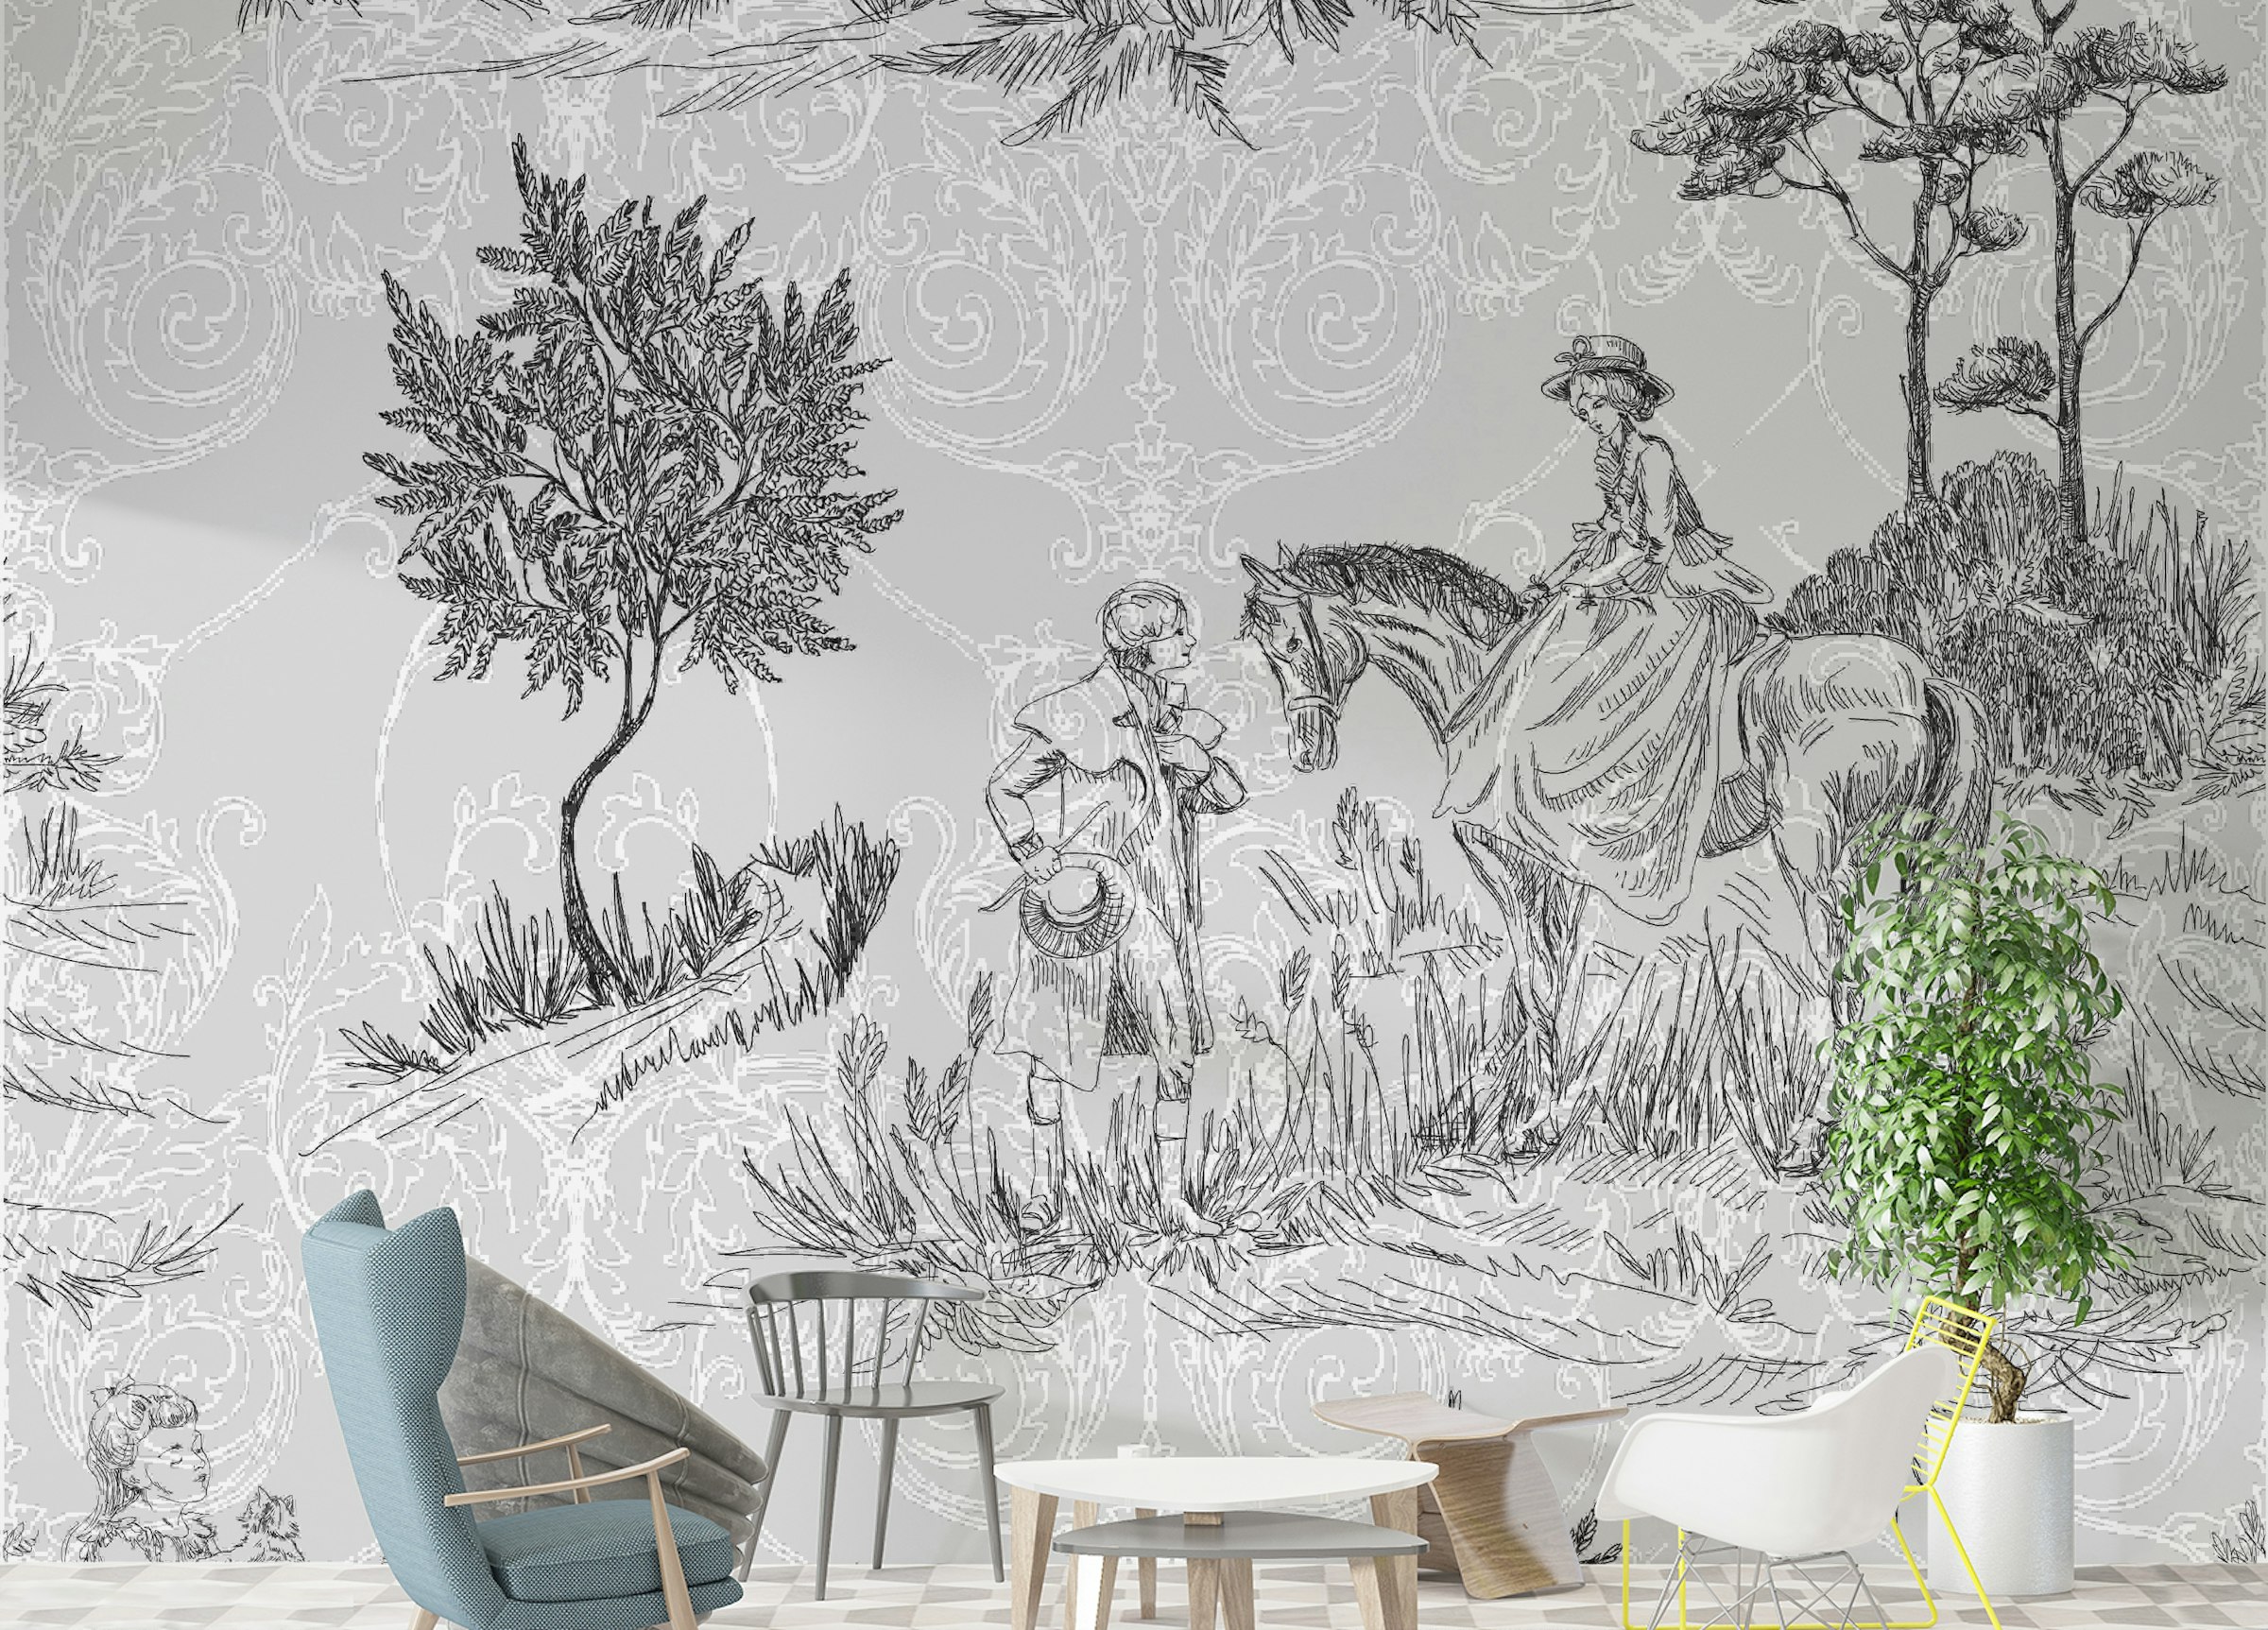 Custom made Rococo Inspired Pastoral Wall mural